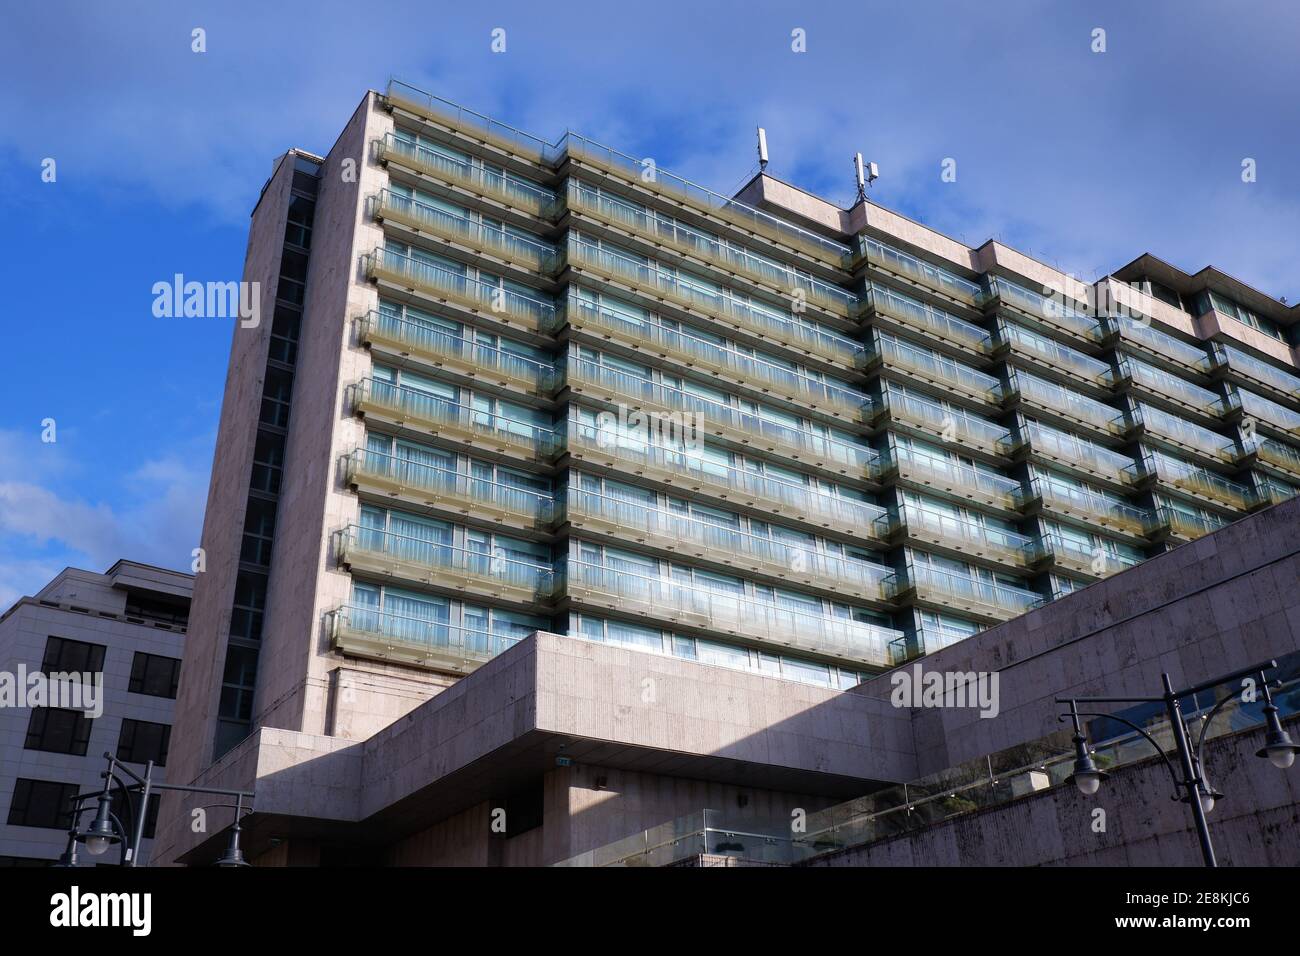 Budapest, Hungary - January 15, 2021: View of the old retro socialist style Intercontinental hotel in Budapest downtown Stock Photo